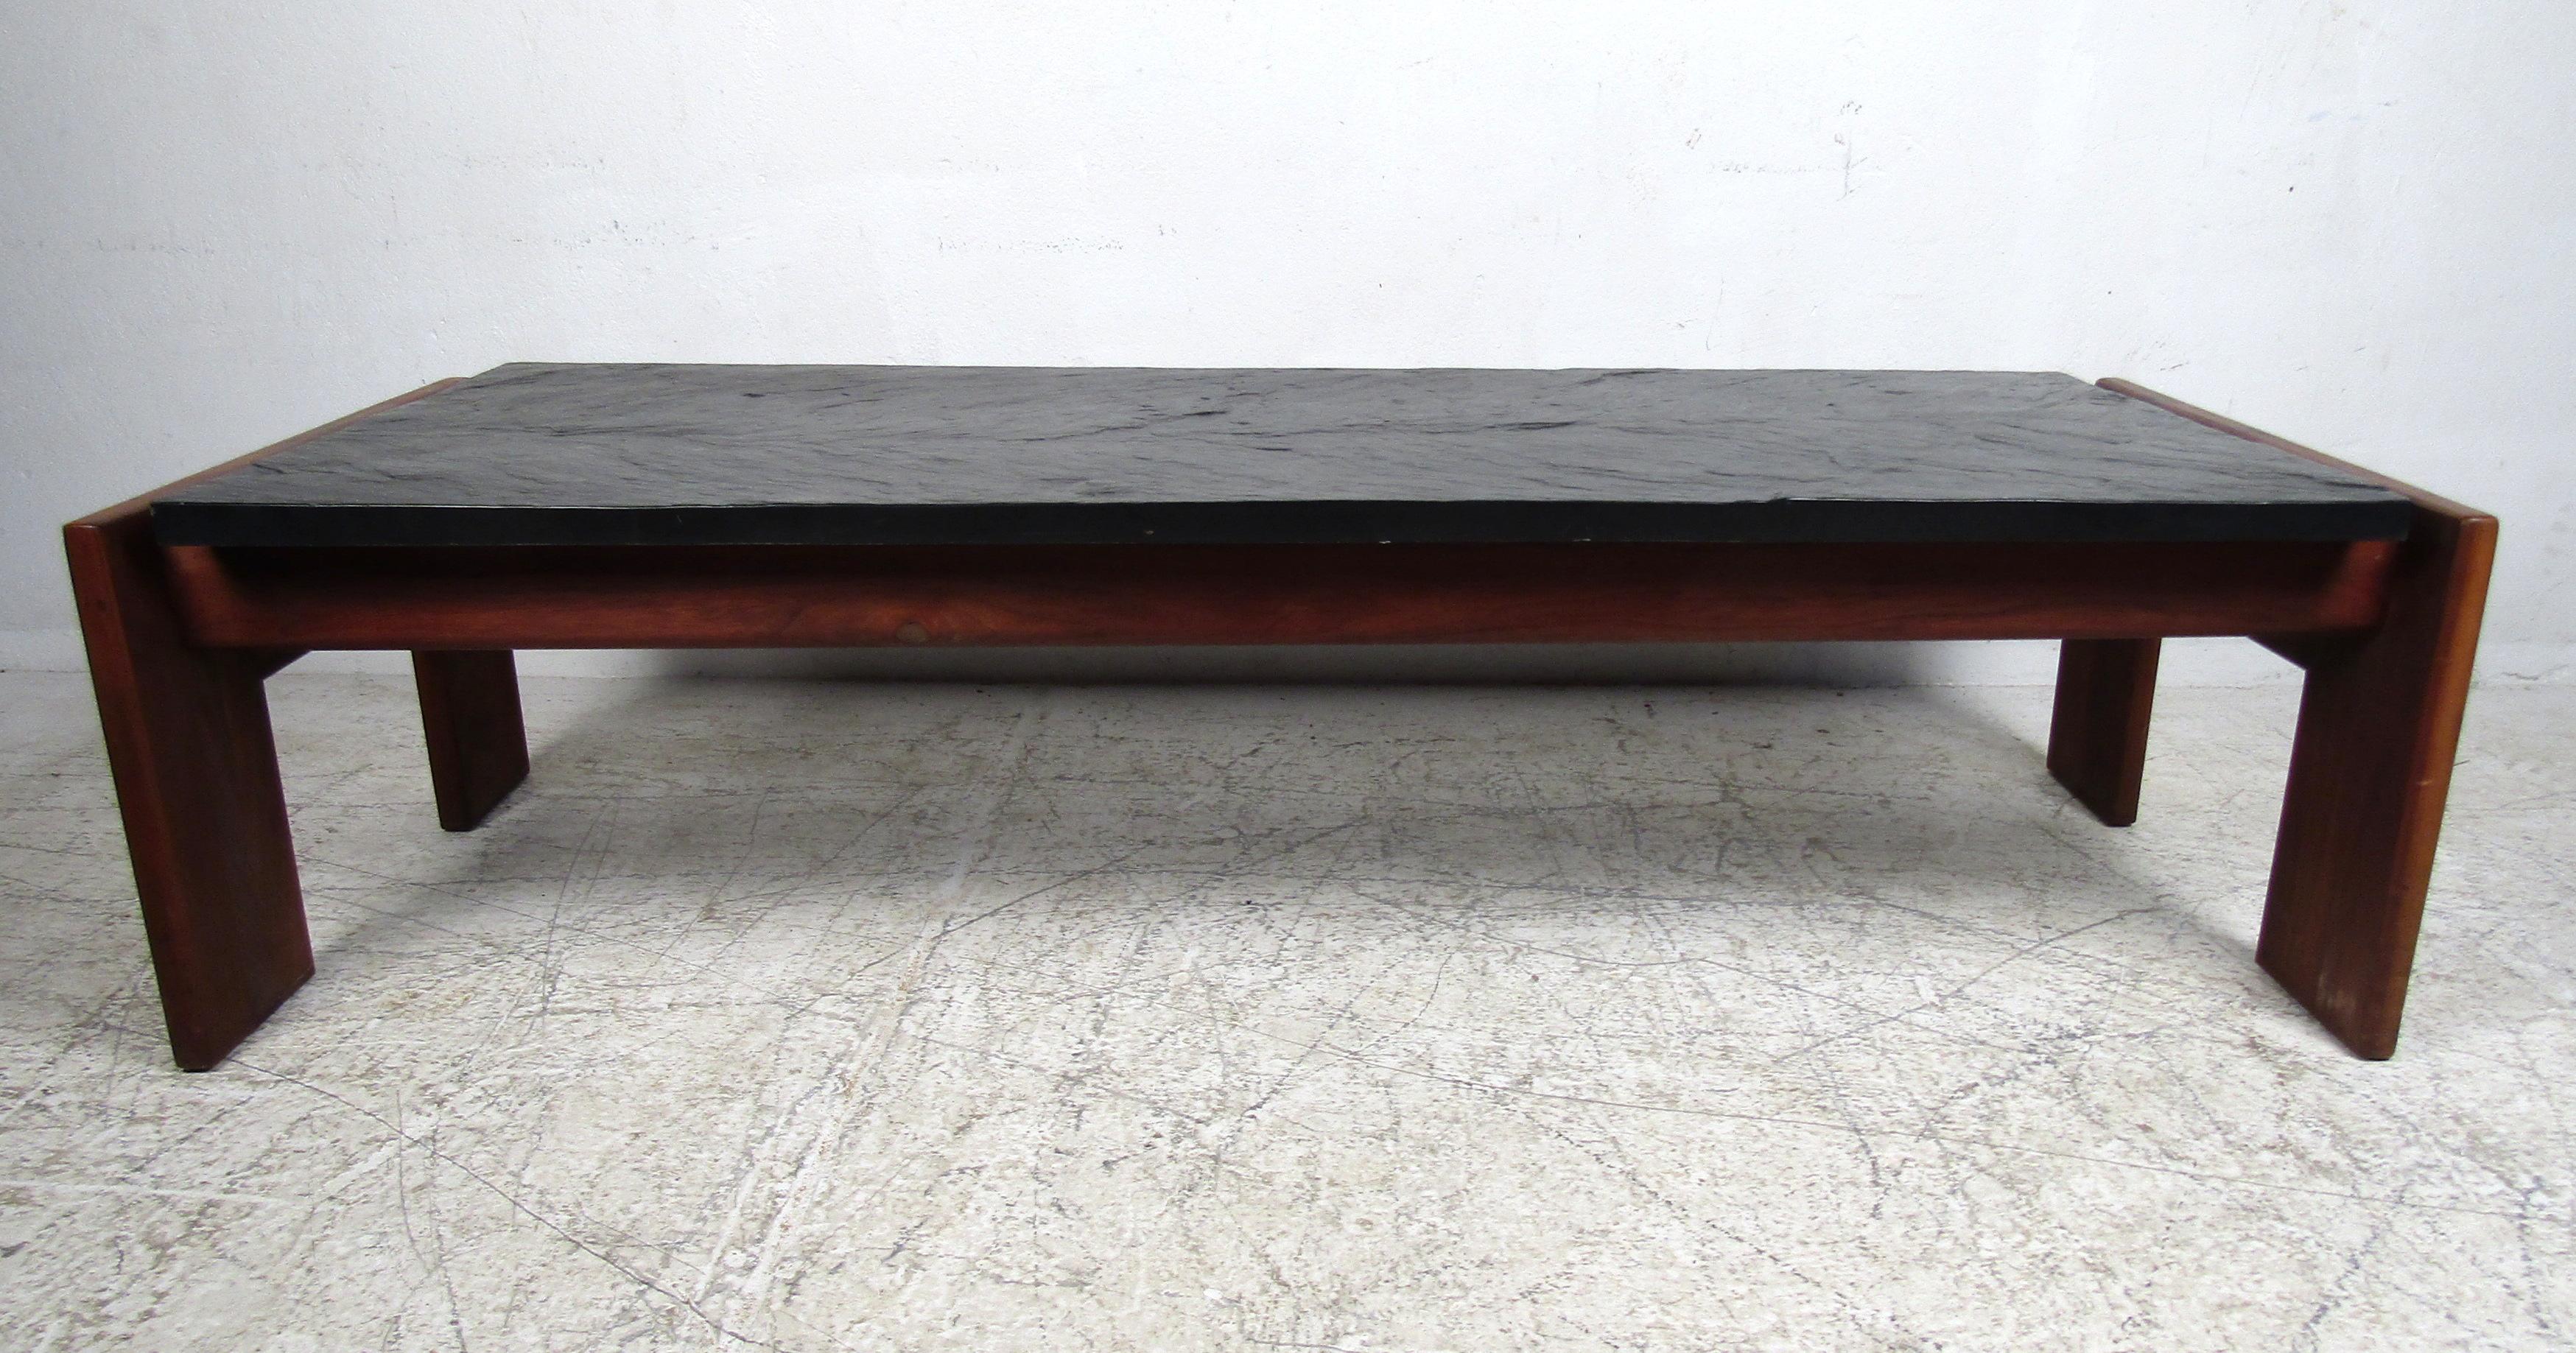 Vintage modern slate top coffee table featured in rich walnut grain by Adrian Pearsall.

Please confirm the item location (NY or NJ).
        